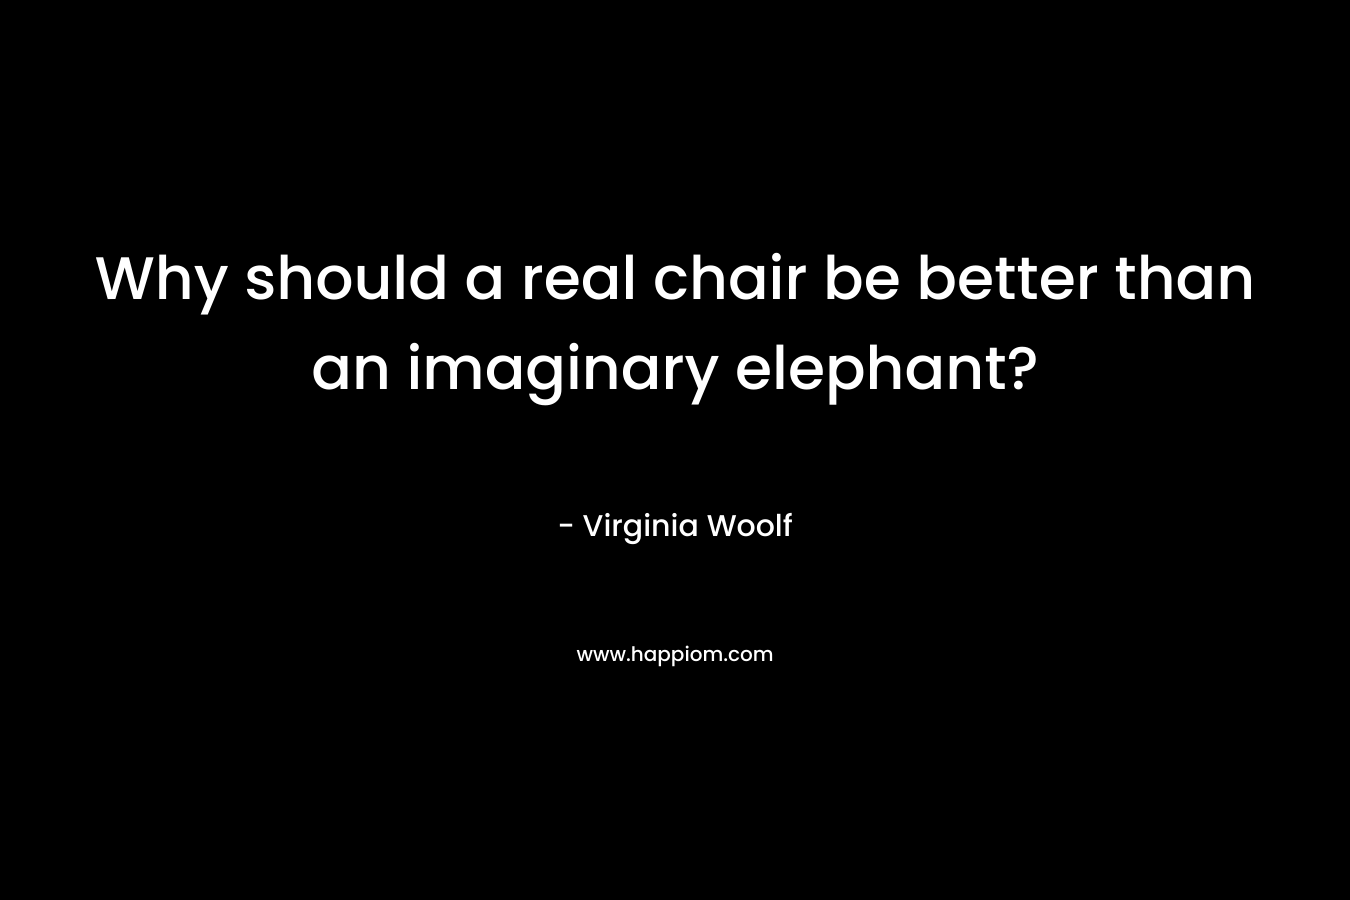 Why should a real chair be better than an imaginary elephant?